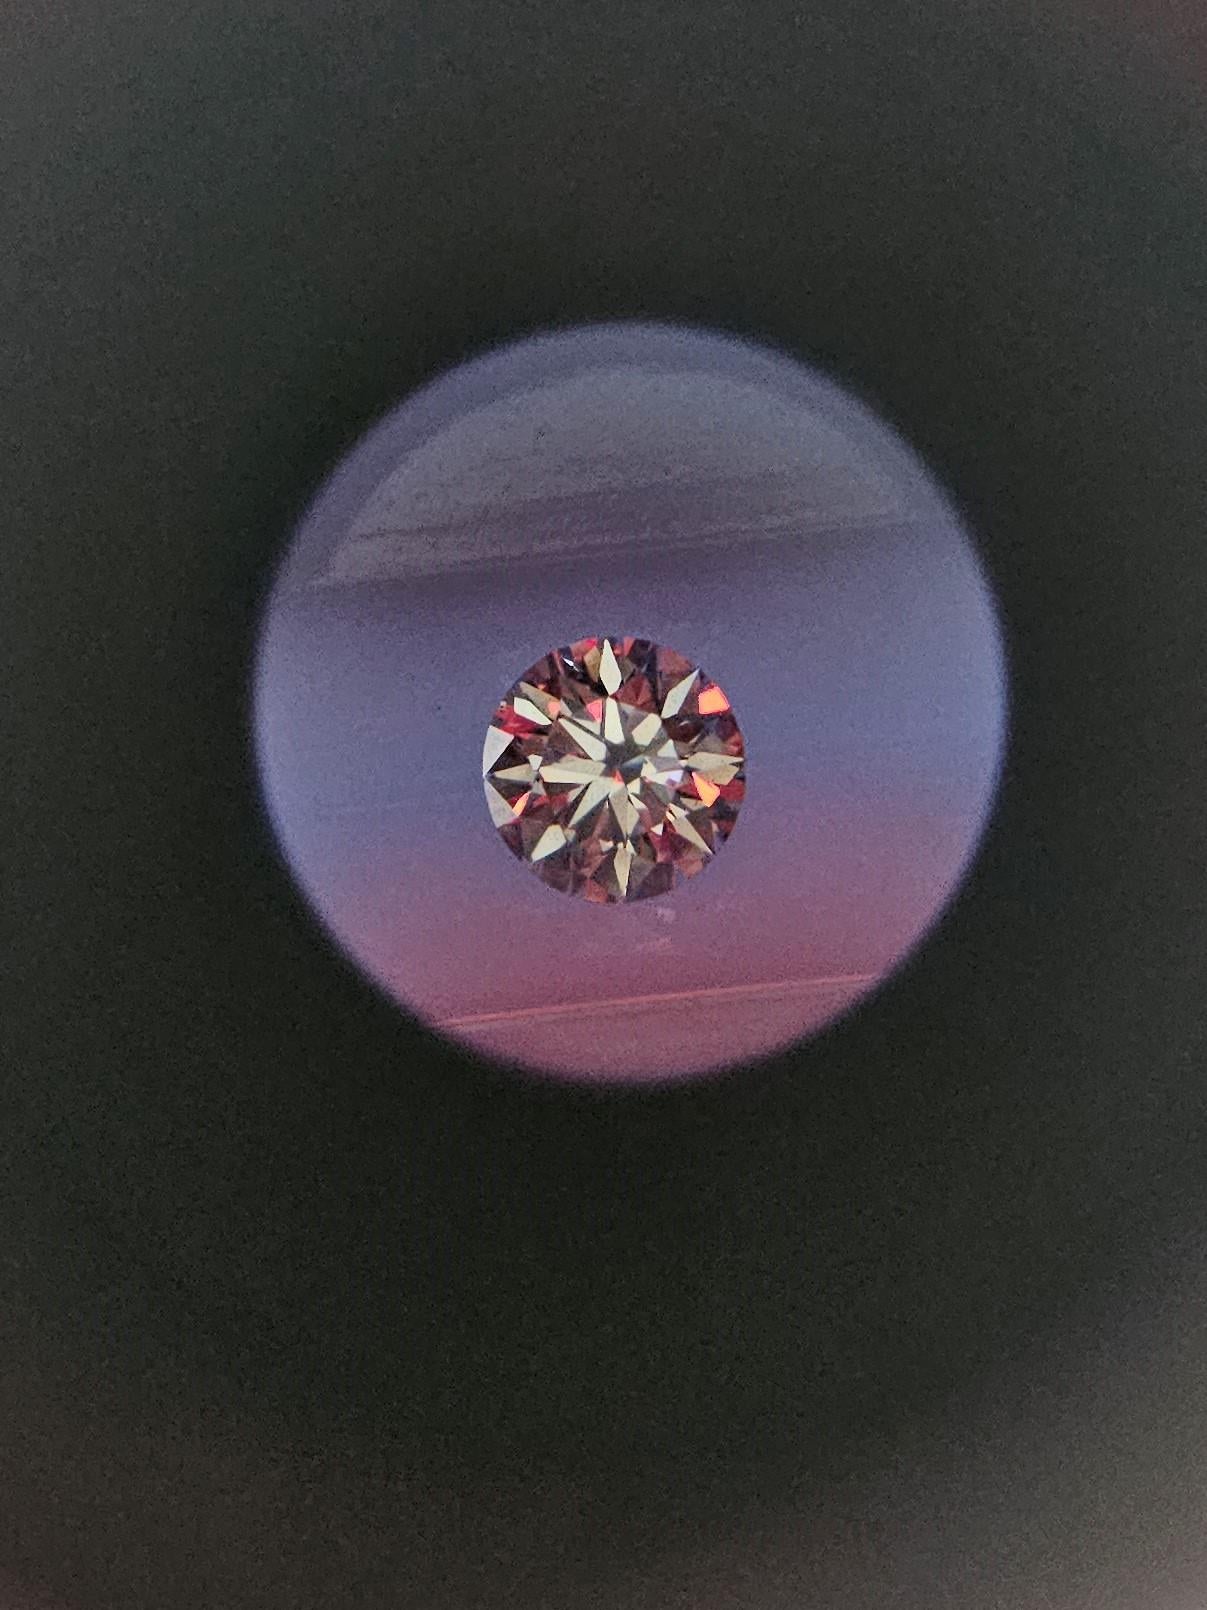 New Cert 1.37 ct Unheated Natural Pink Sapphire Diamond Ring in 14k Gold For Sale 9